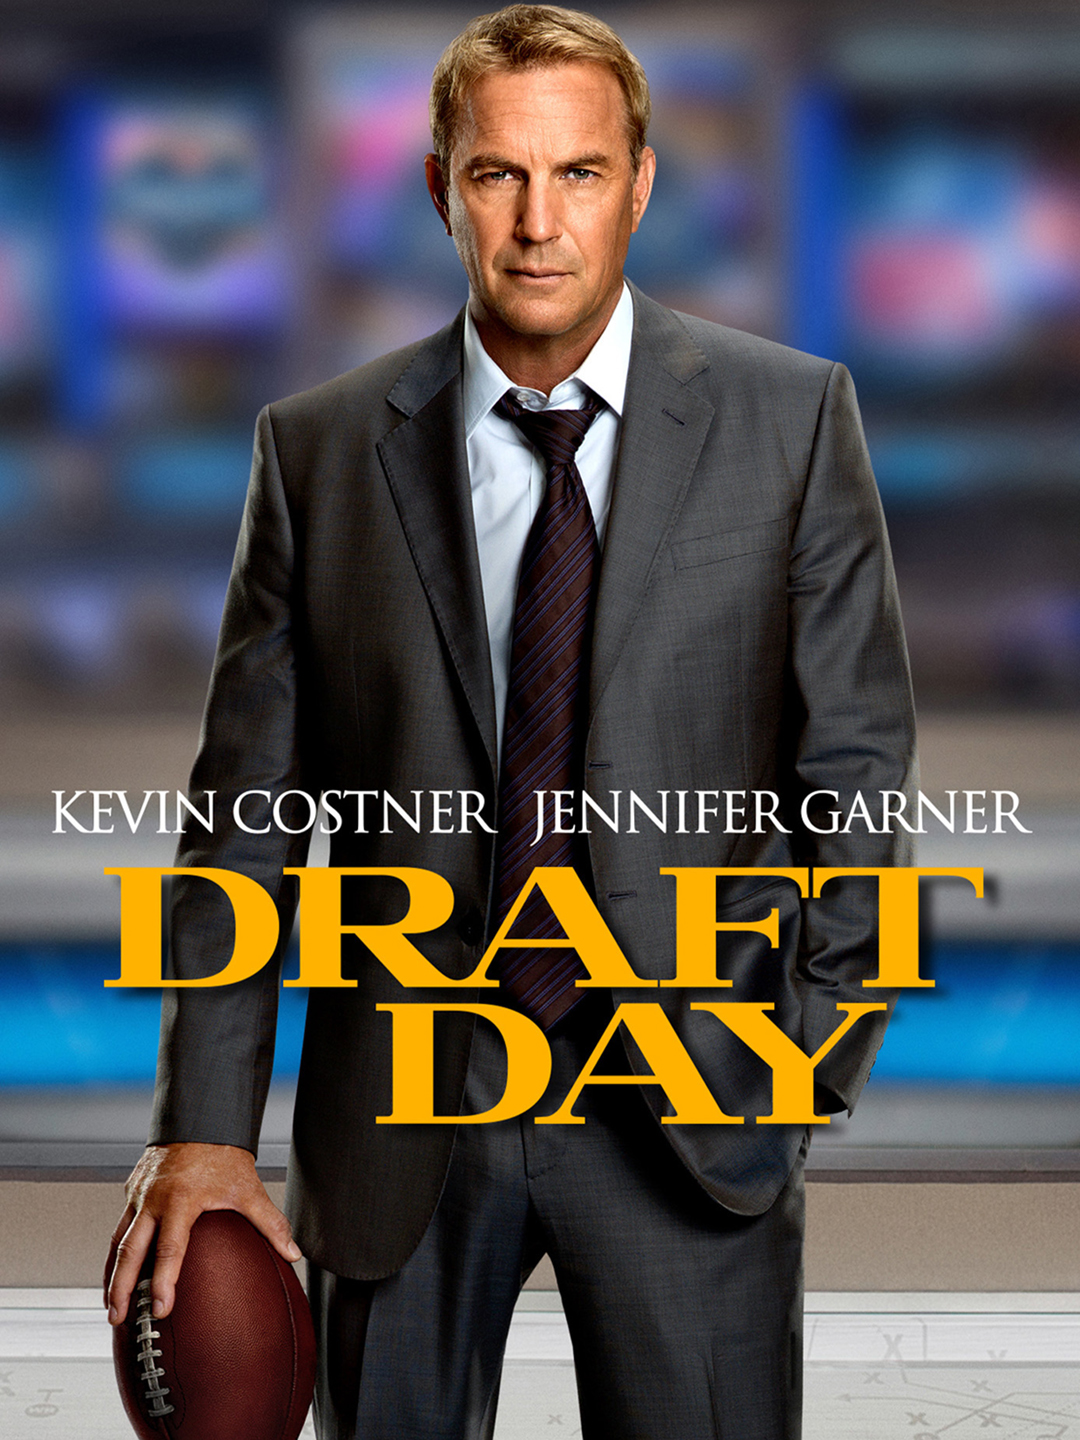 Draft Day': an actual movie about the Cleveland Browns 